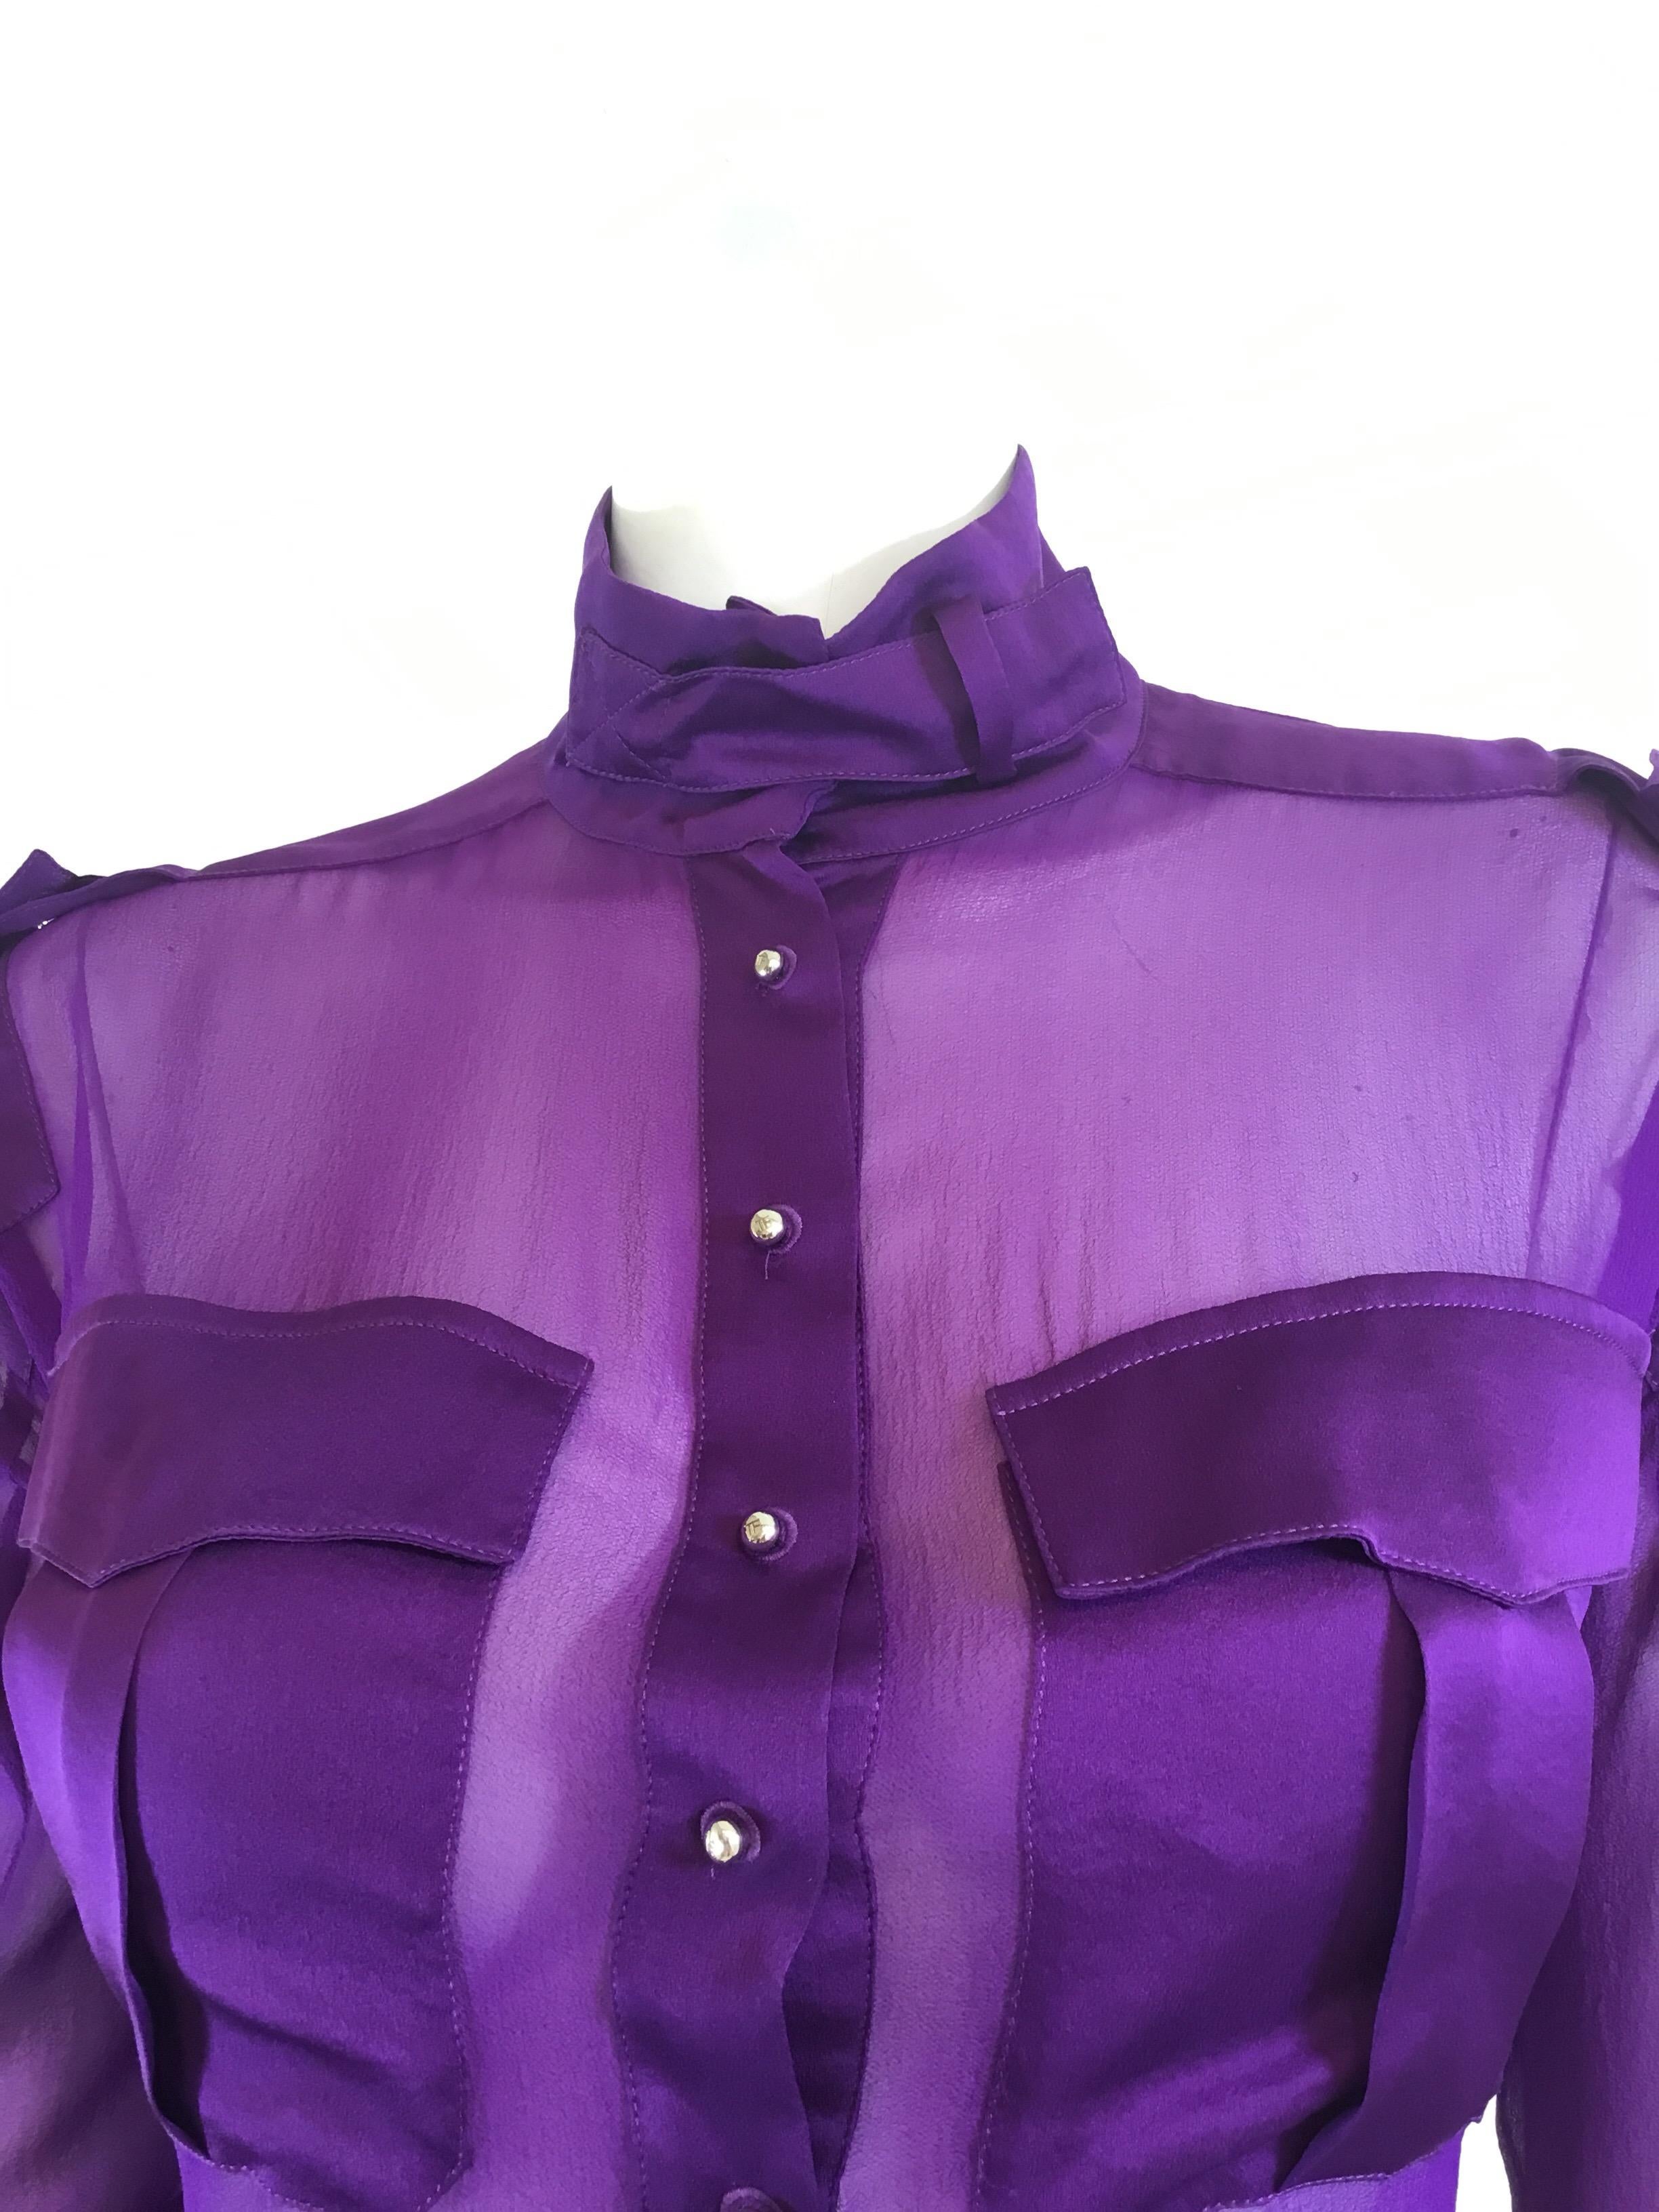 Tom Ford Silk blouse festured in purple with silver tone button closures, epaulette shoulders, and patch pockets. Blouse is labeled a size 42, 100% silk, and made in Italy. 

Measurements:
Bust 42”, sleeves 23”, shoulder to shoulder 21”, length 25”